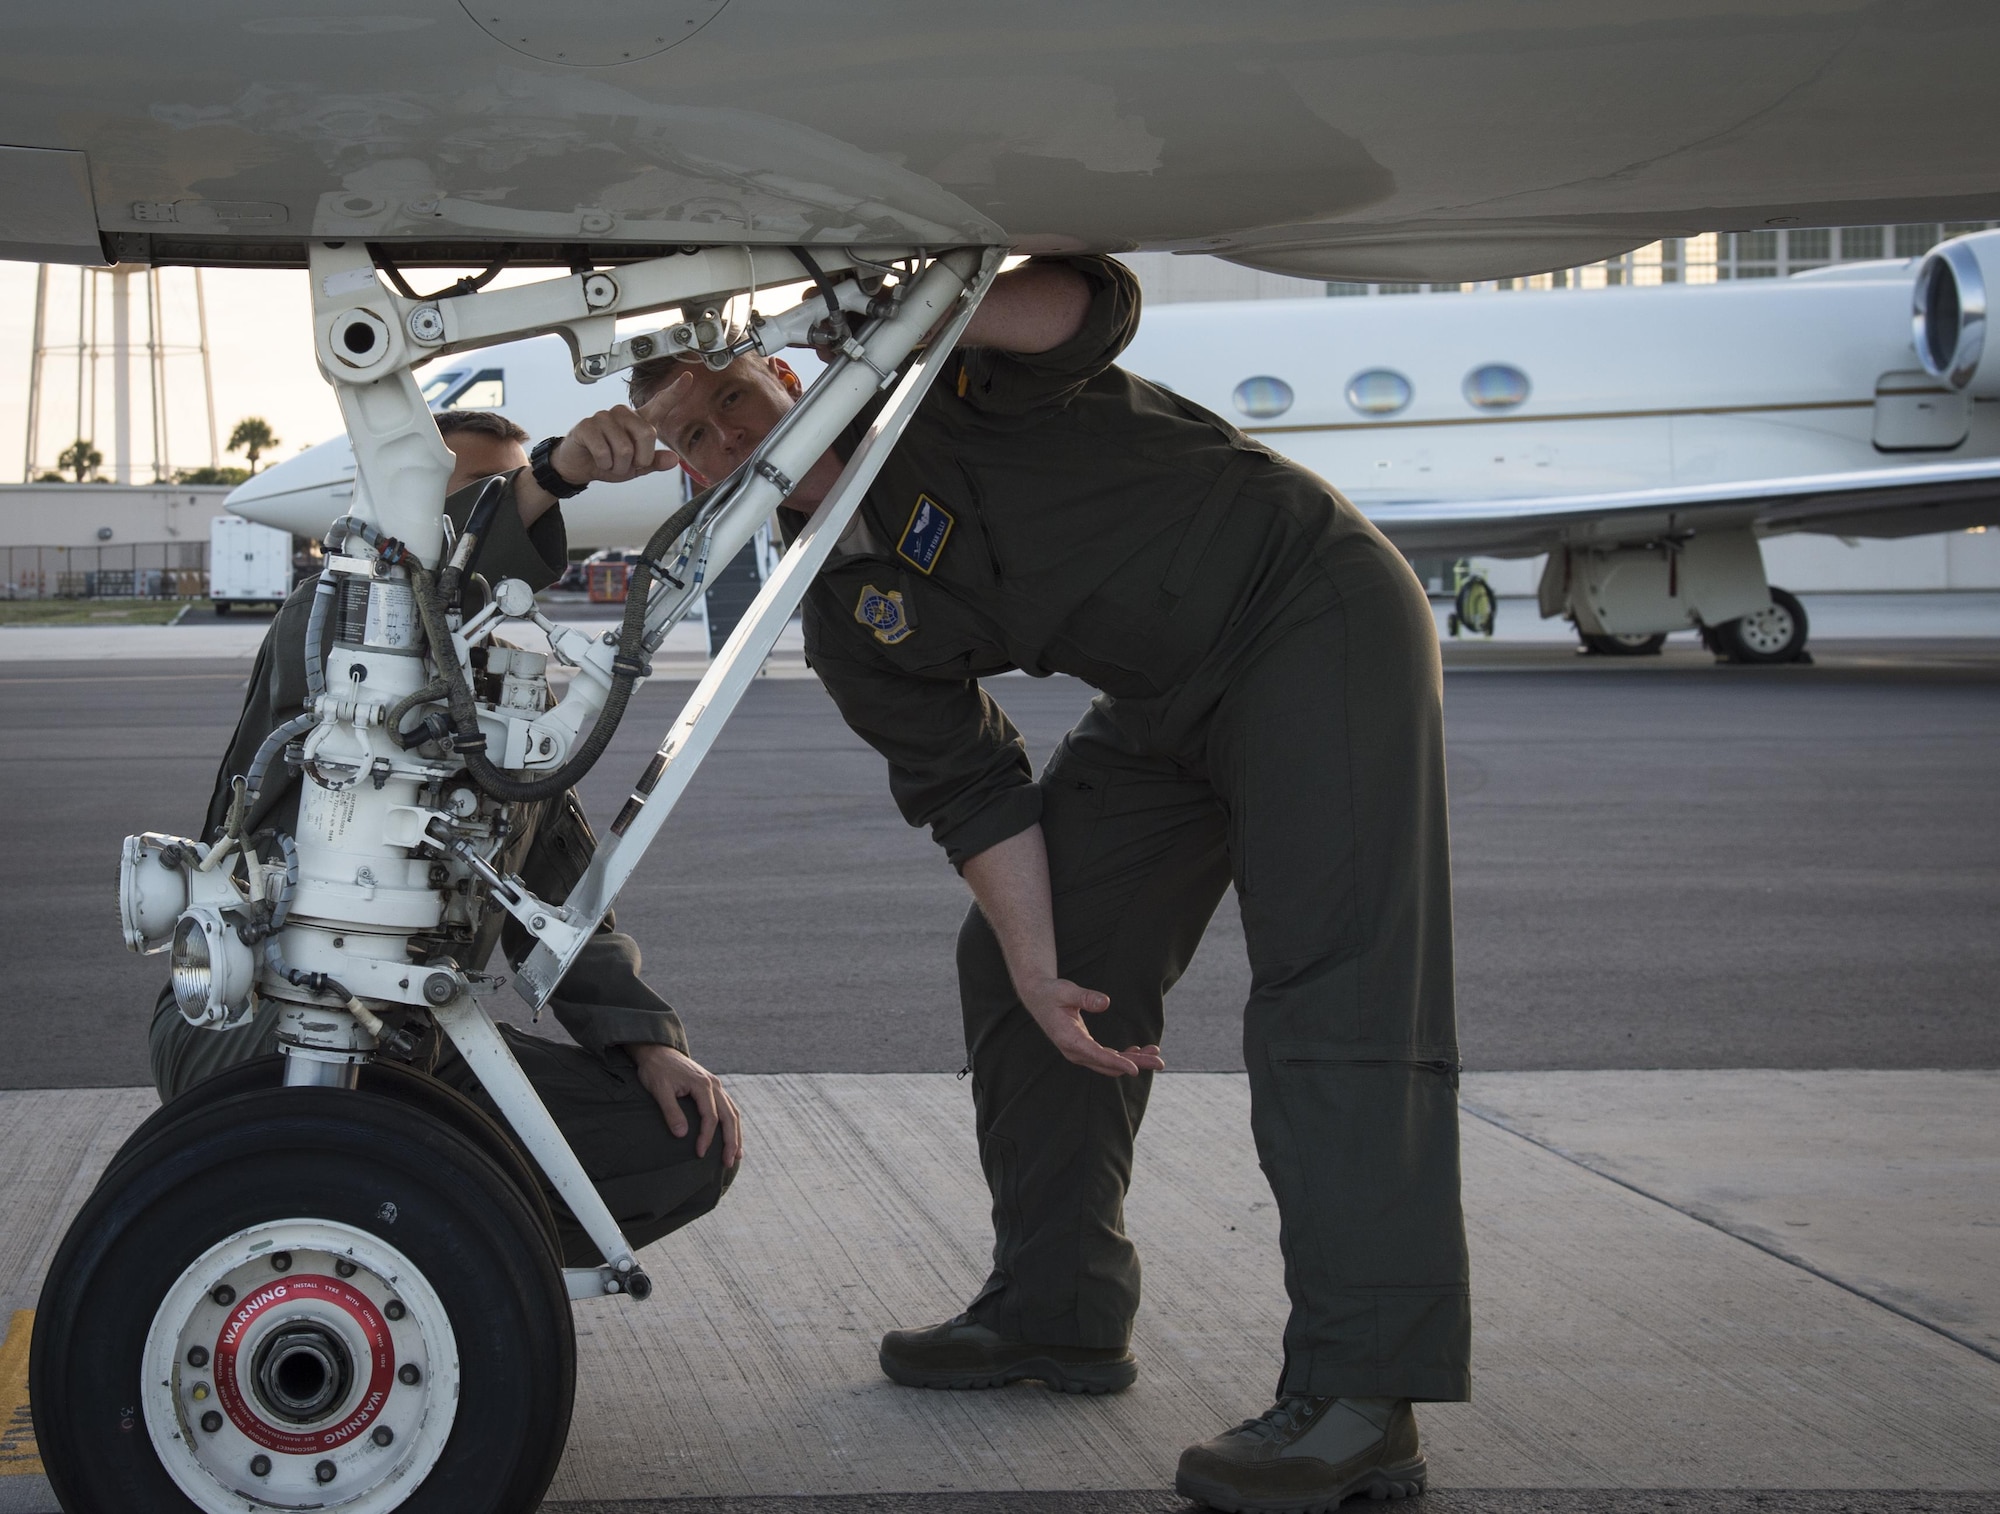 U.S. Air Force Tech. Sgt. Ben Doyle, left, the NCO in charge of flight engineers, and Tech. Sgt. Ryan Lilly, right, a flight engineer assigned to the 310th Airlift Squadron, inspect the landing gear on a C-37A Gulfstream at MacDill Air Force Base, Fla., April 13, 2017. Flight engineers must inspect both the inside and outside of the aircraft before take-off. (U.S. Air Force photo by Airman 1st Class Mariette Adams)